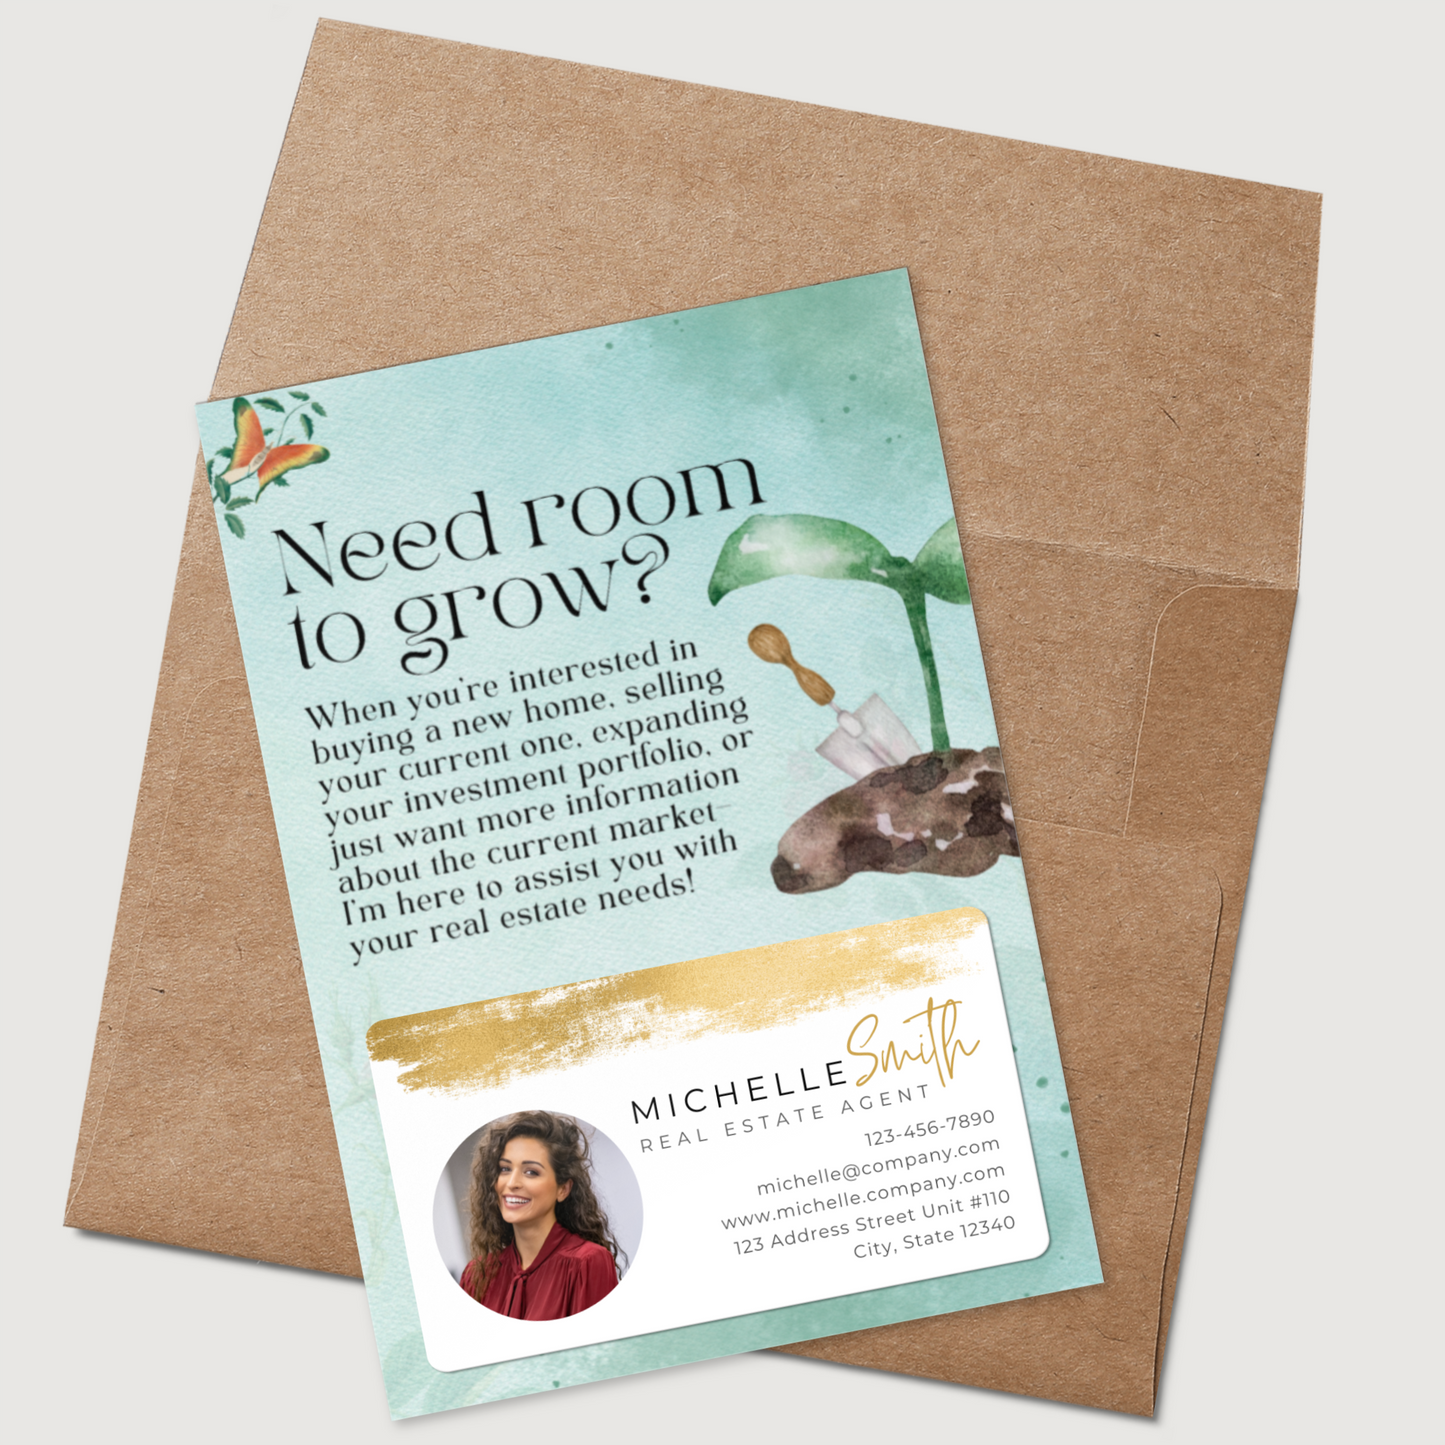 Need Room To Grow - Set of Spring Real Estate Postcard Mailers